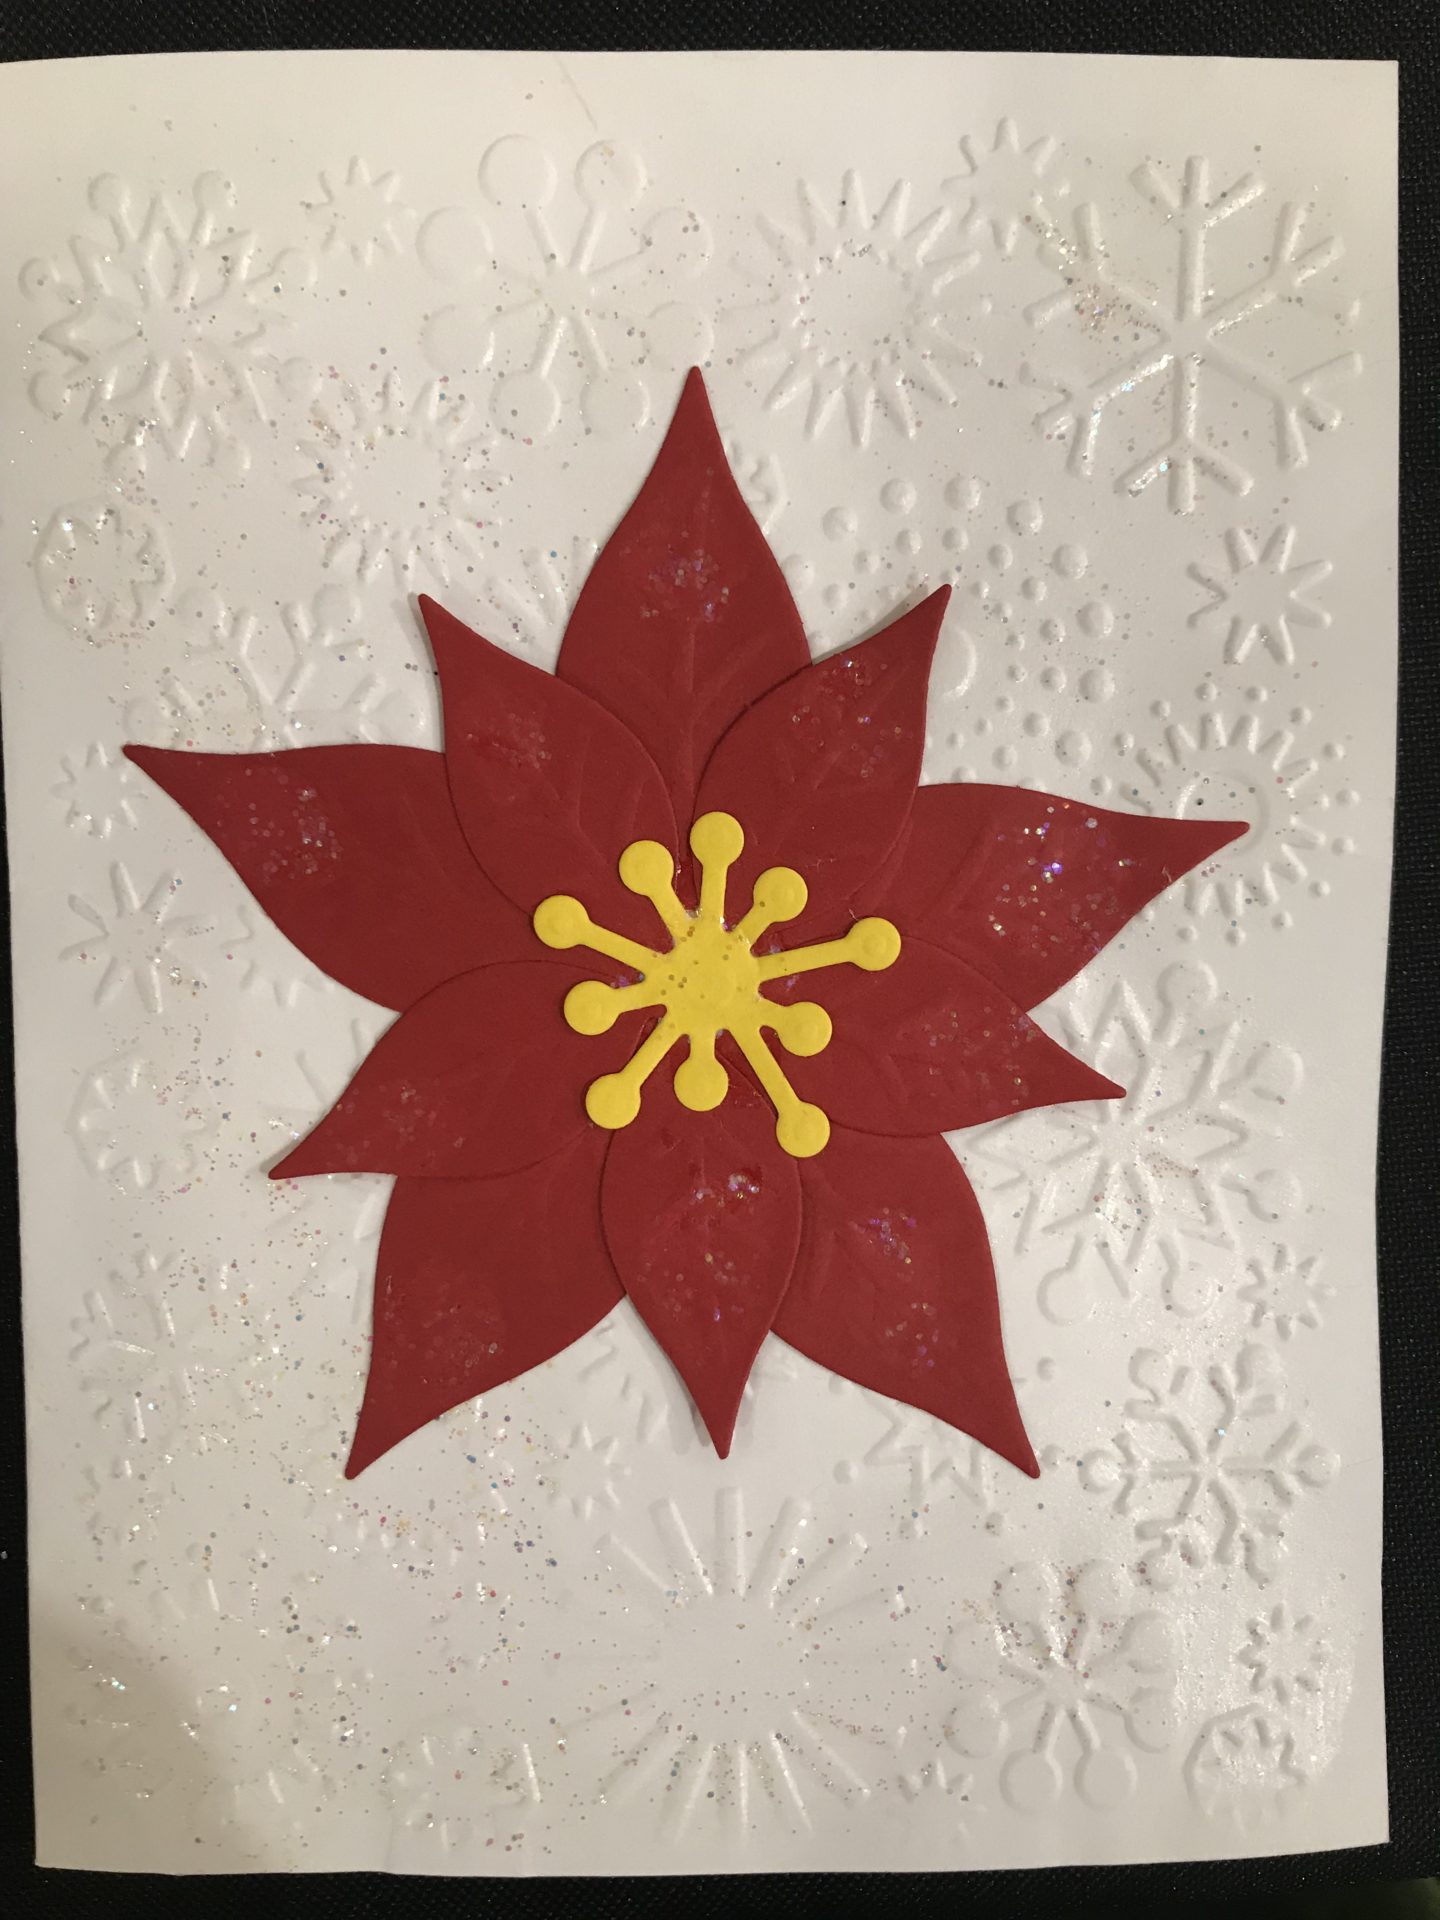 Tactile red poinsettia collage on white paper embossed snowflakes